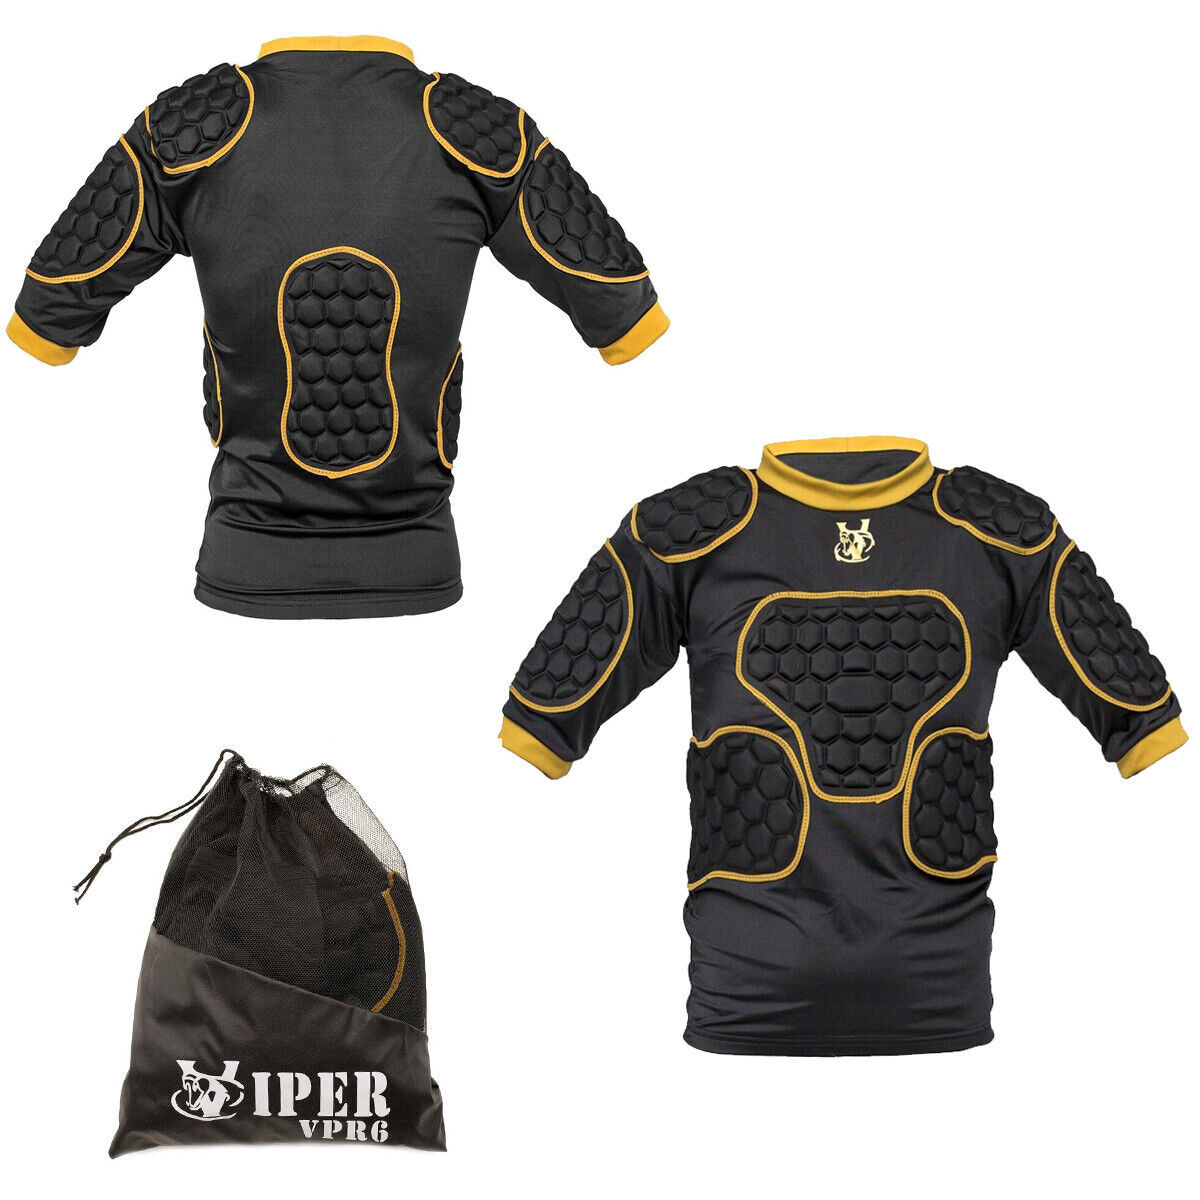 VIPER Rugby Shoulder Pads Body Armour (Black/Gold)